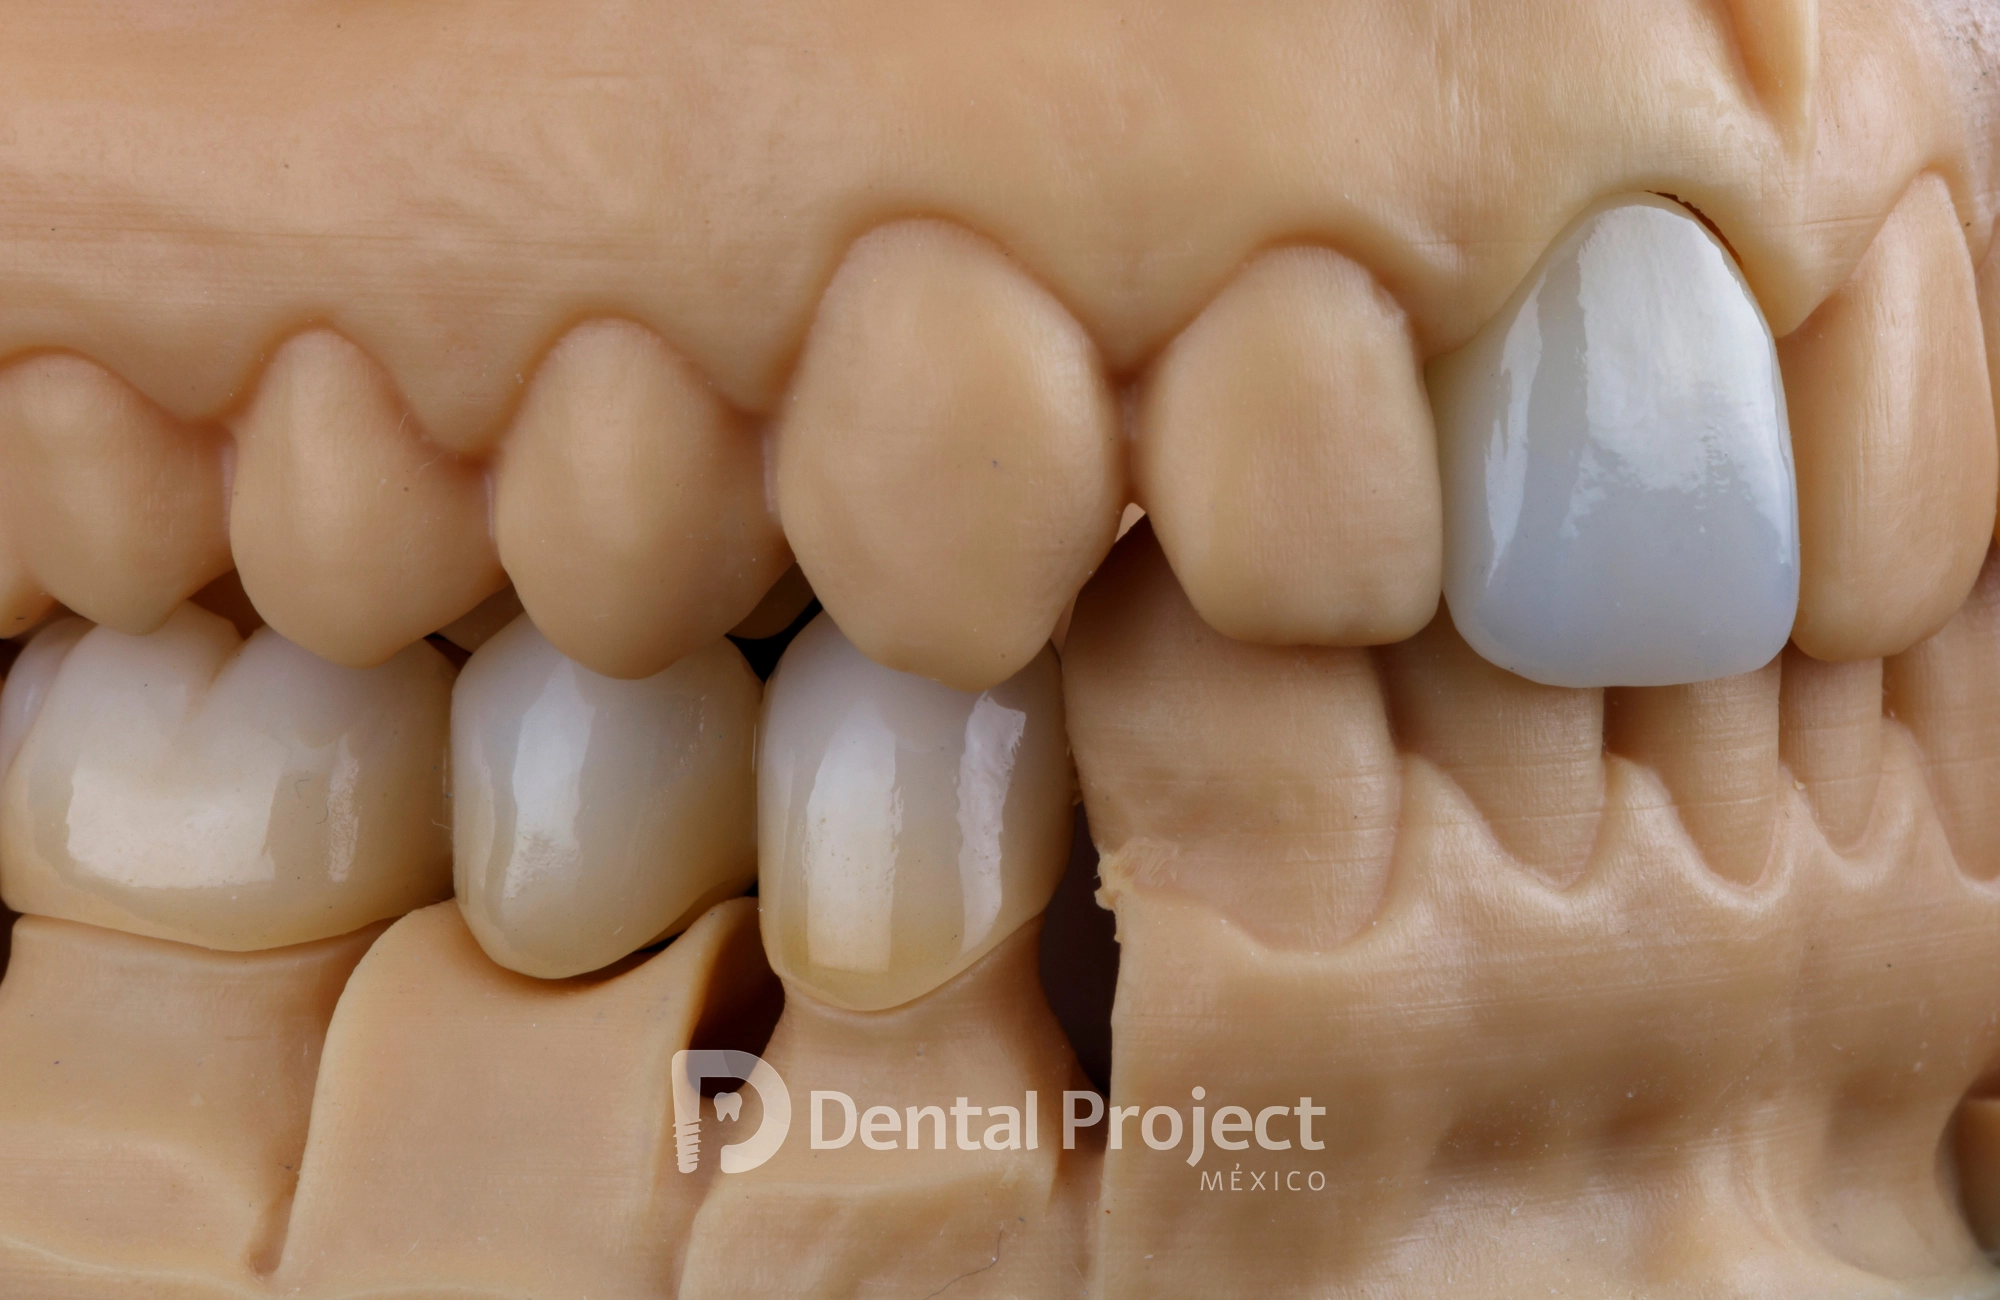 Dental Project Mexico Prosthetic Dentistry .